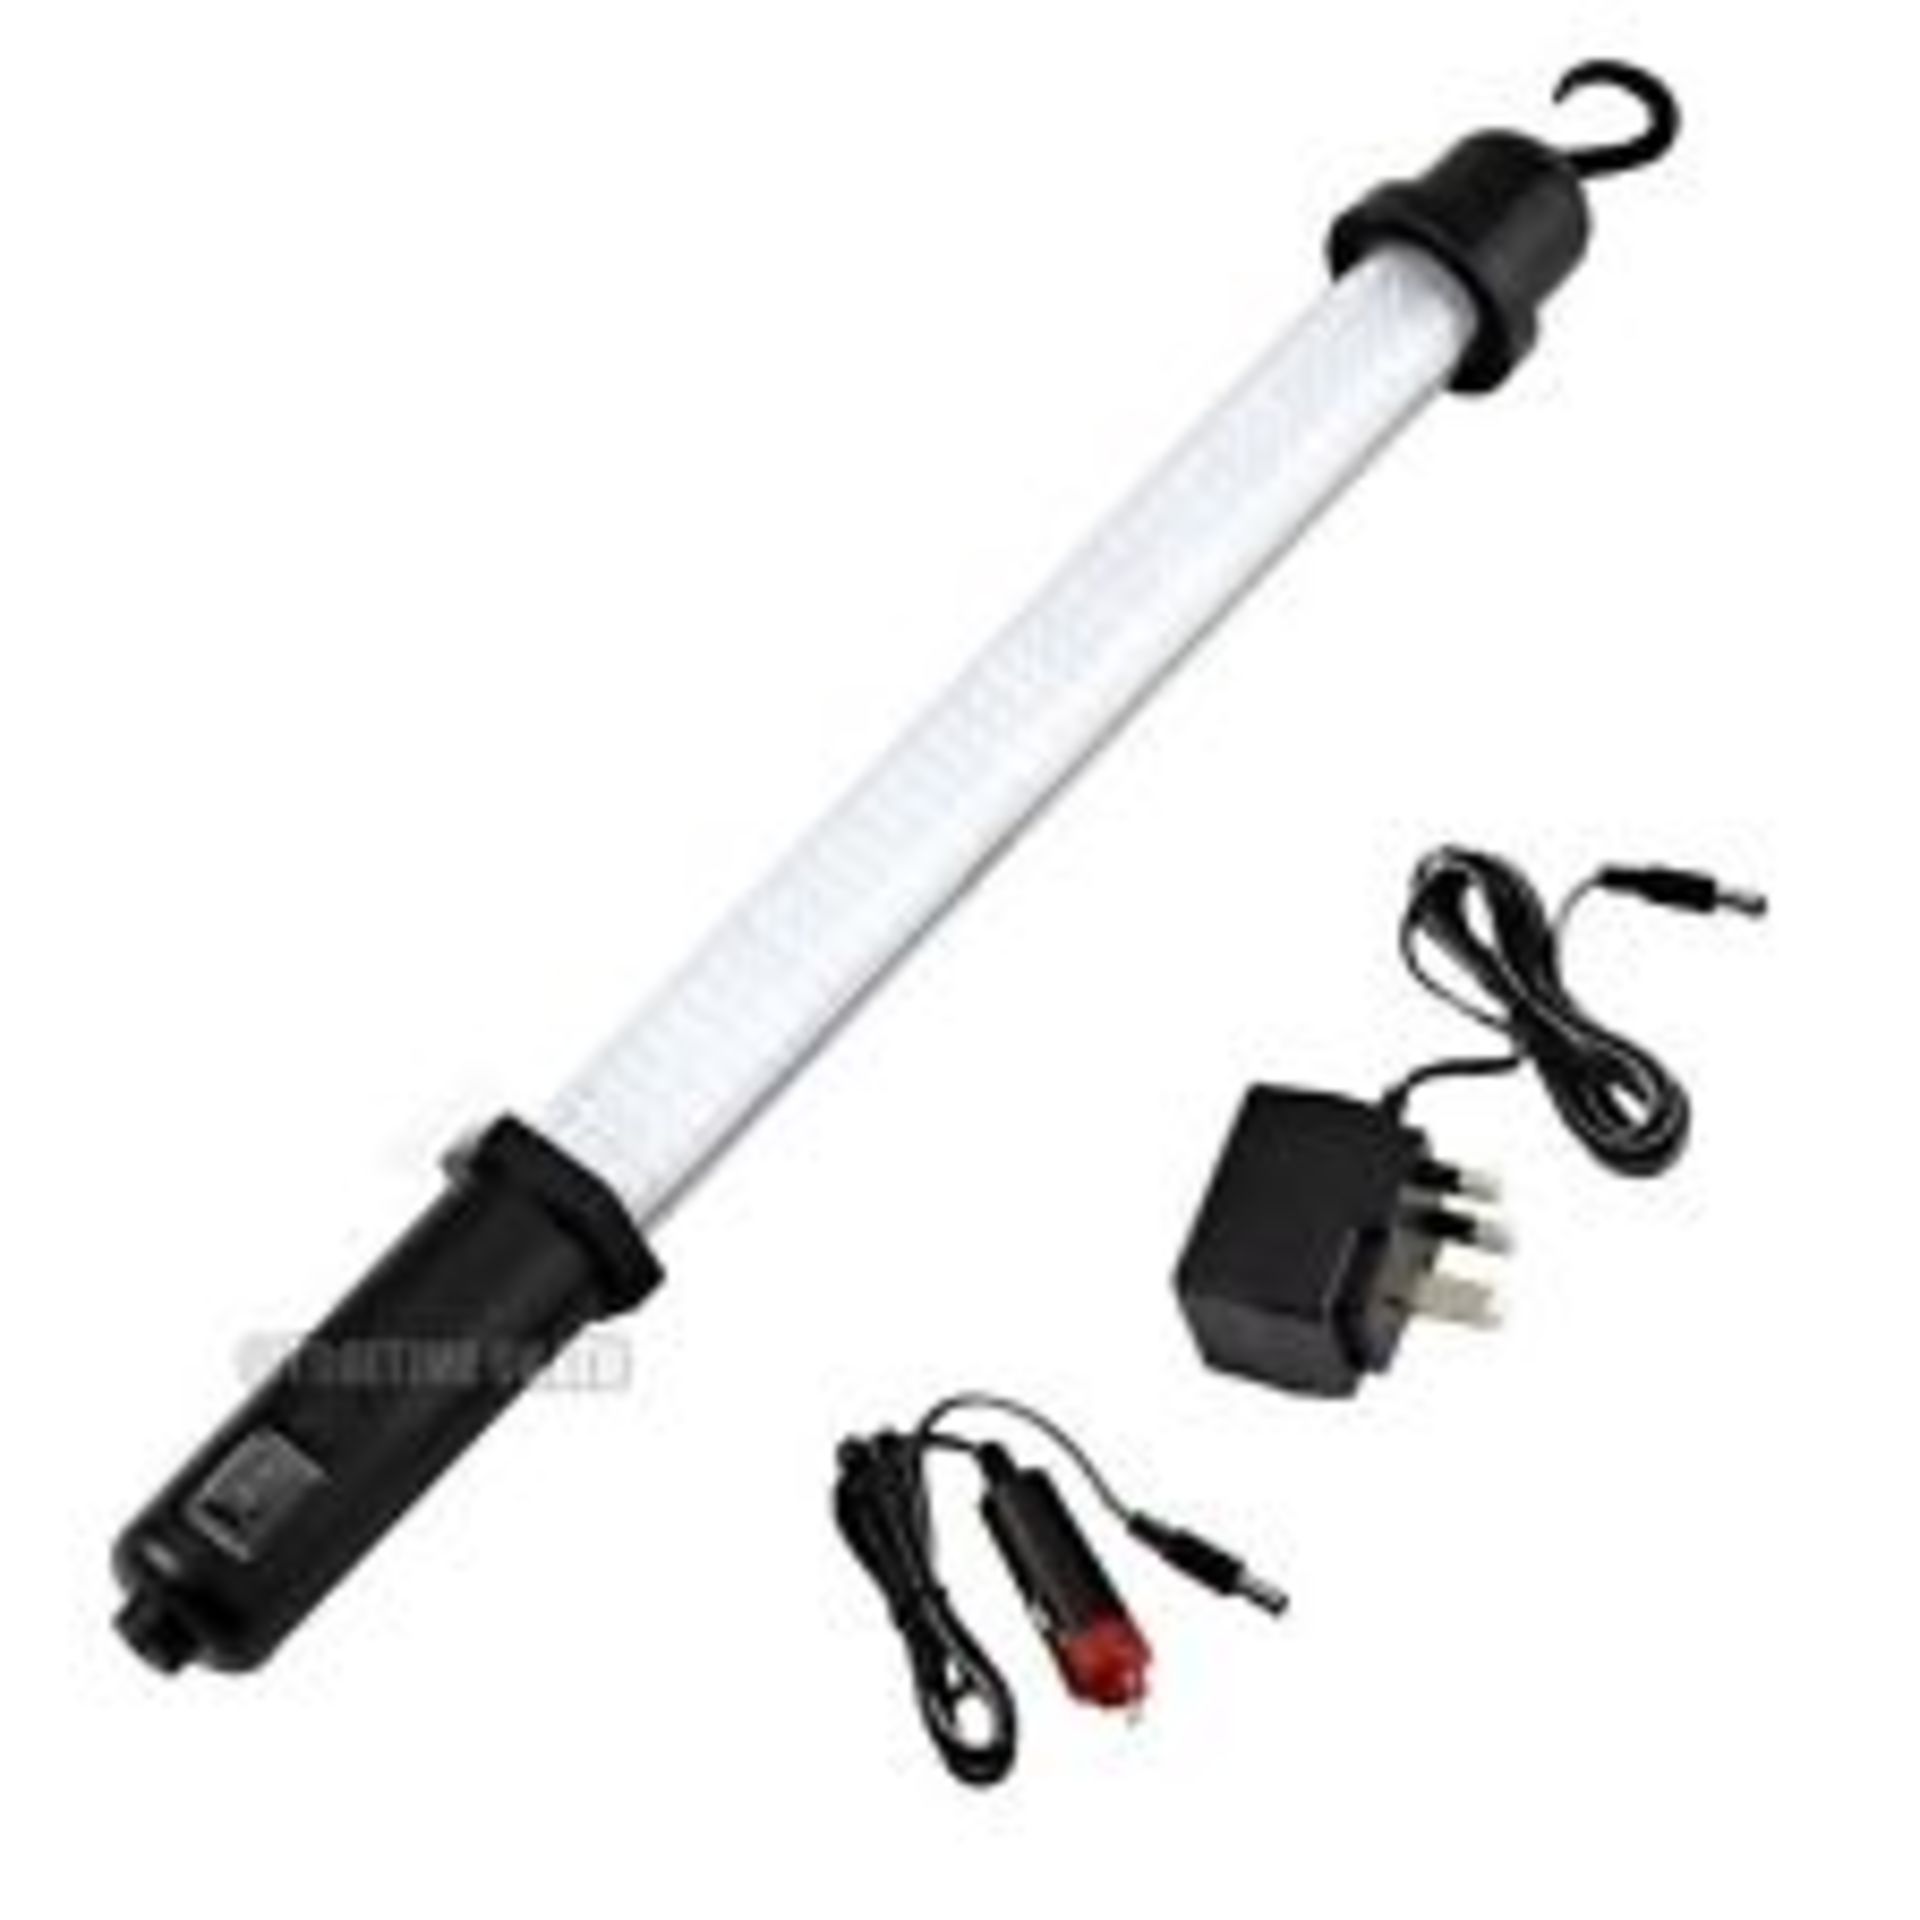 V Brand New Work Zone 60 LED Cordless Workshop Lamp-12v In Car Charger-Mains Adapter RRP £39.80